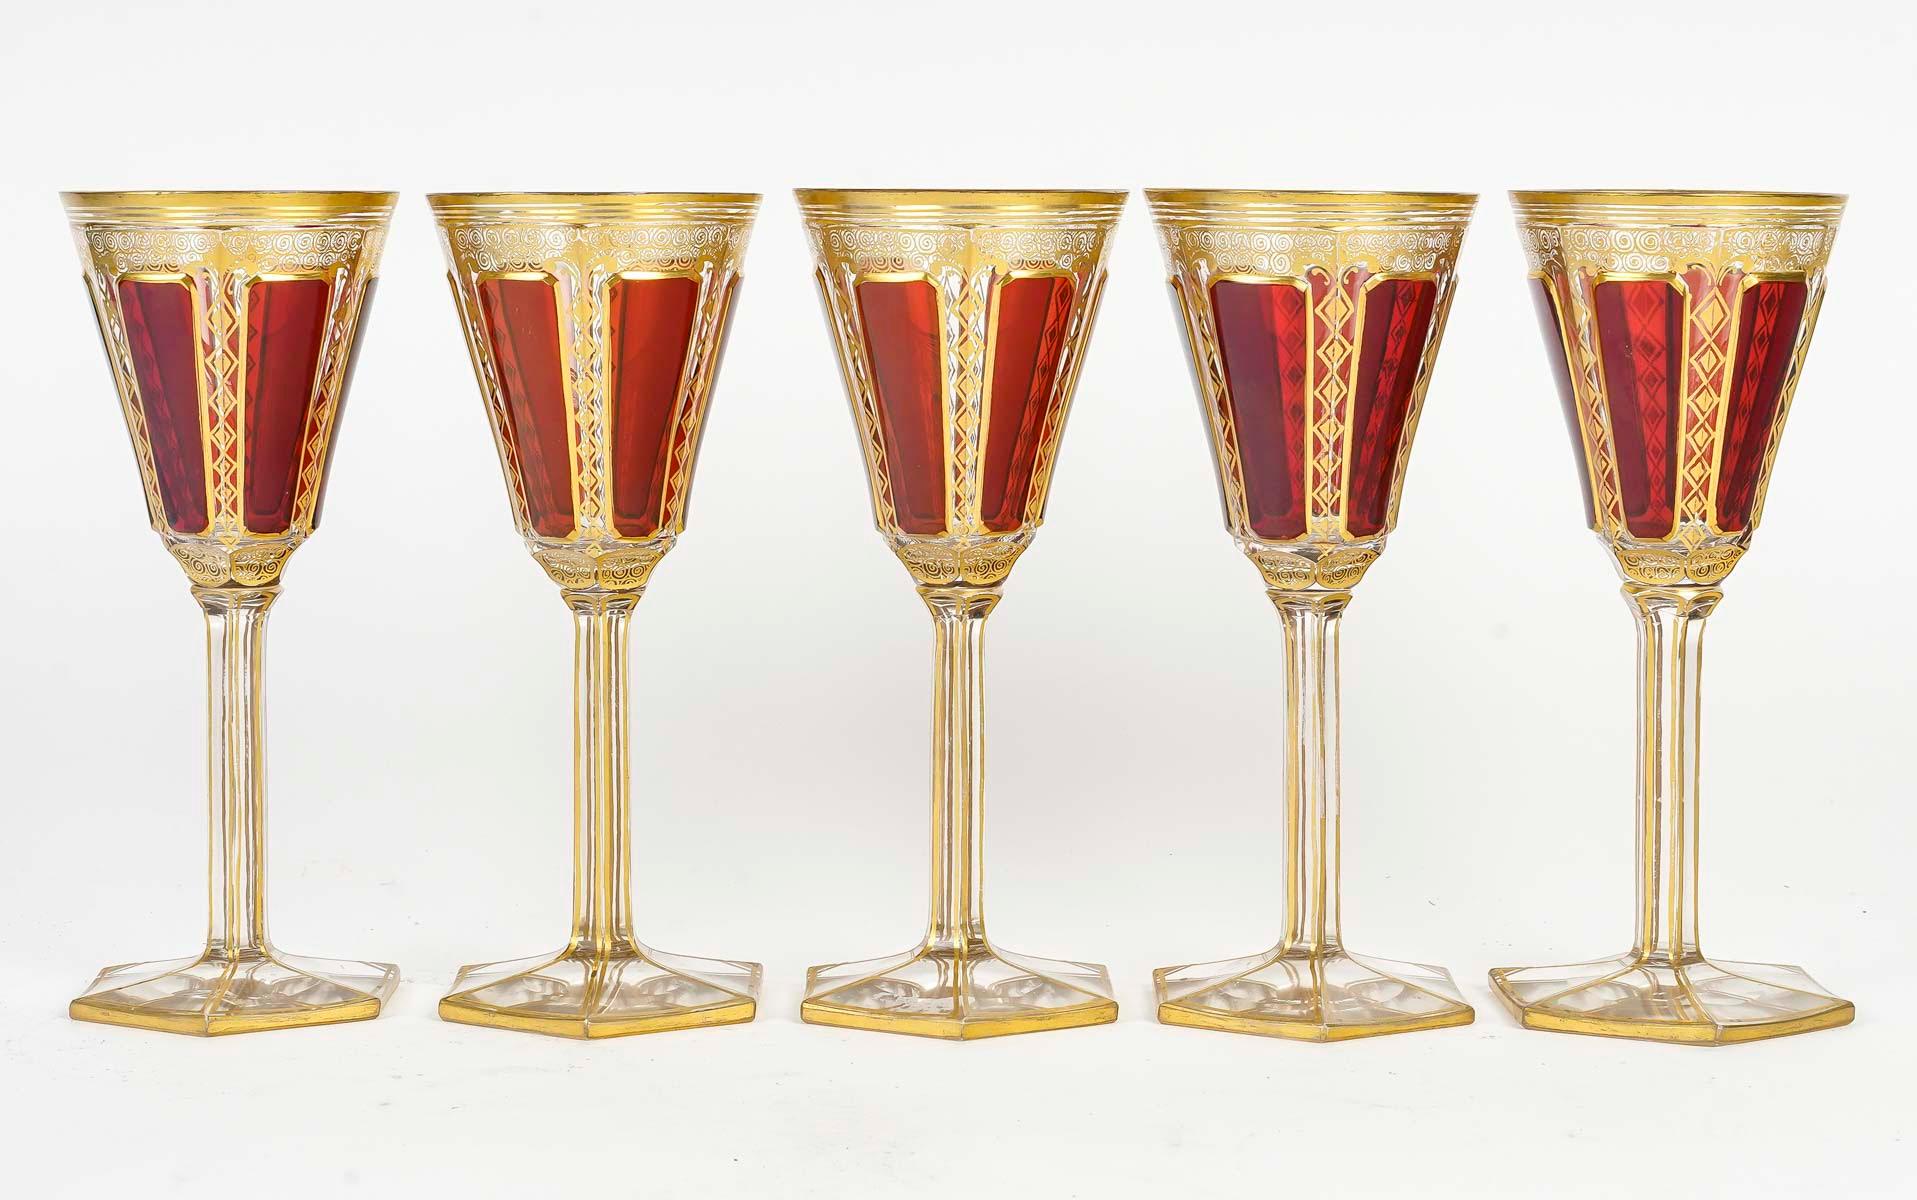 5 Bohemian crystal glasses, red cabochon, 19th century, Napoleon III period.

Five Bohemian crystal glasses, red cabochon, 19th century, Napoleon III period.
h: 18cm, d: 7cm